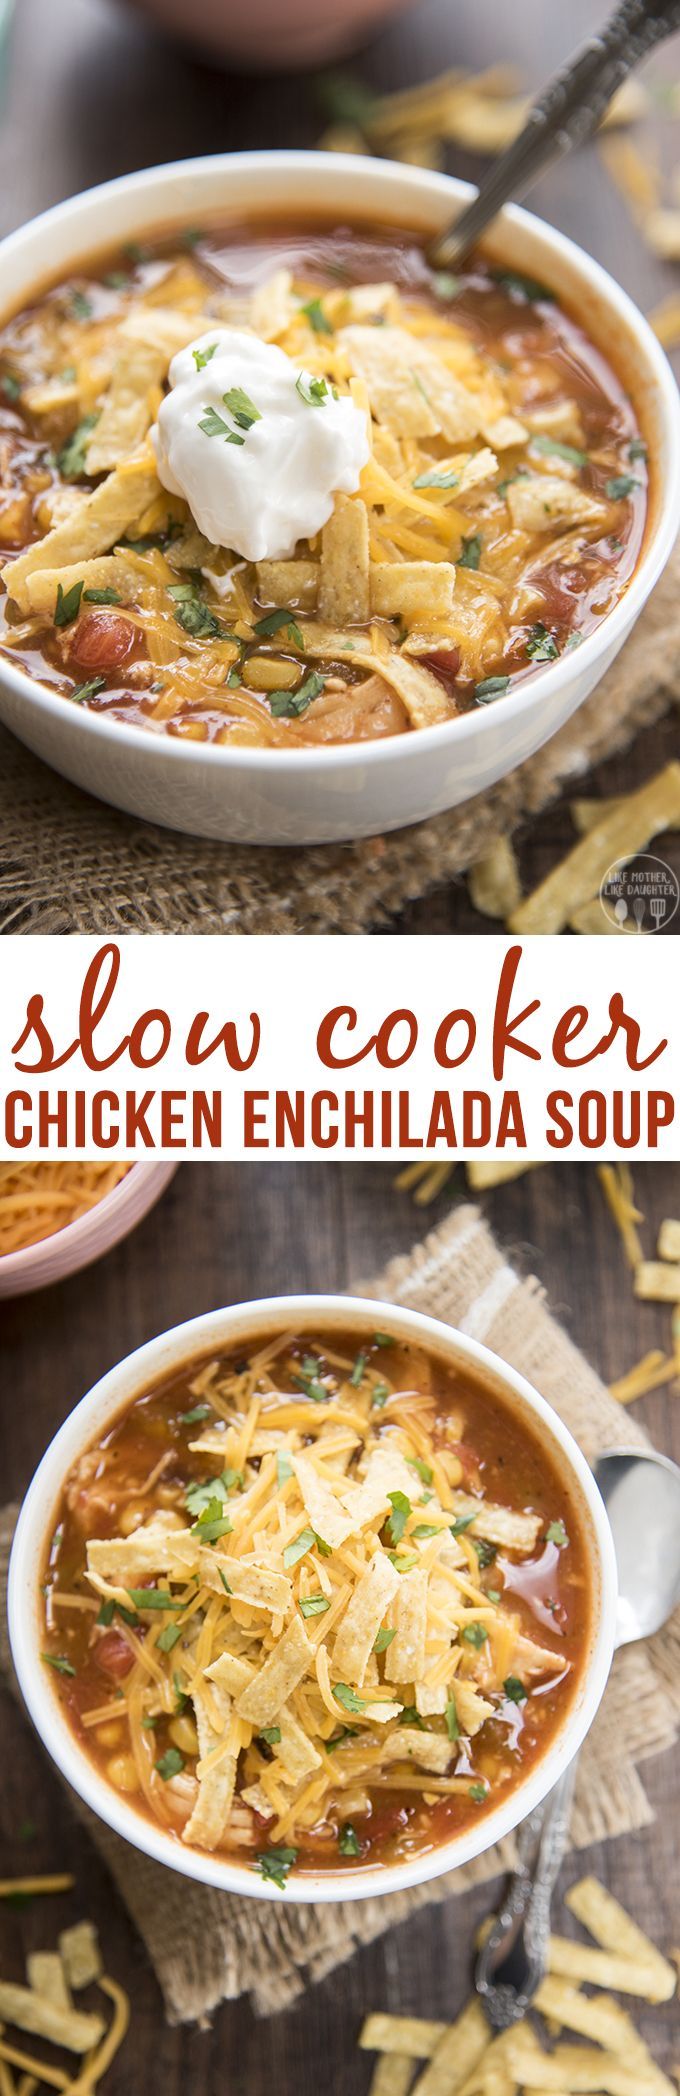 Slow Cooker Chicken Enchilada Soup – This soup is packed full of flavor, with hardly any work, for a meal that the whole family